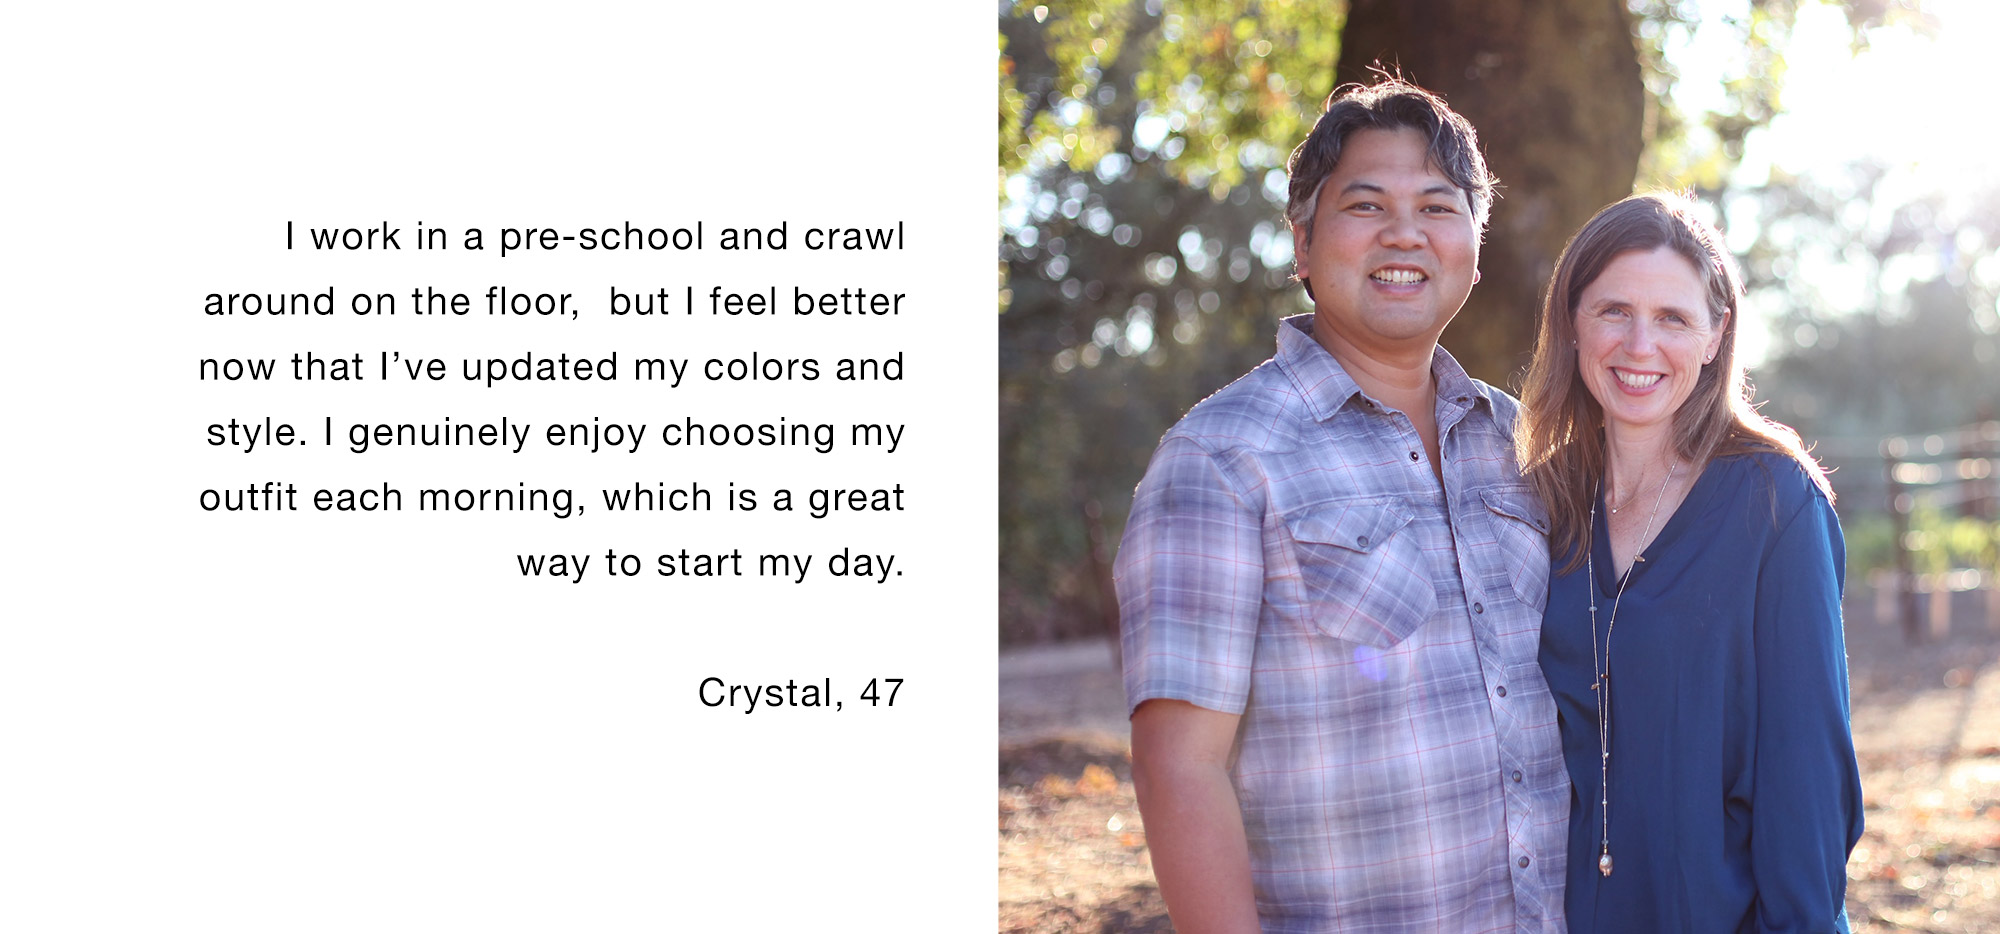 I work in a pre-school and crawl around on the floor, but I feel better now that I’ve updated my colors and style. I genuinely enjoy choosing my outfit each morning, which is a great way to start my day. Crystal, 47